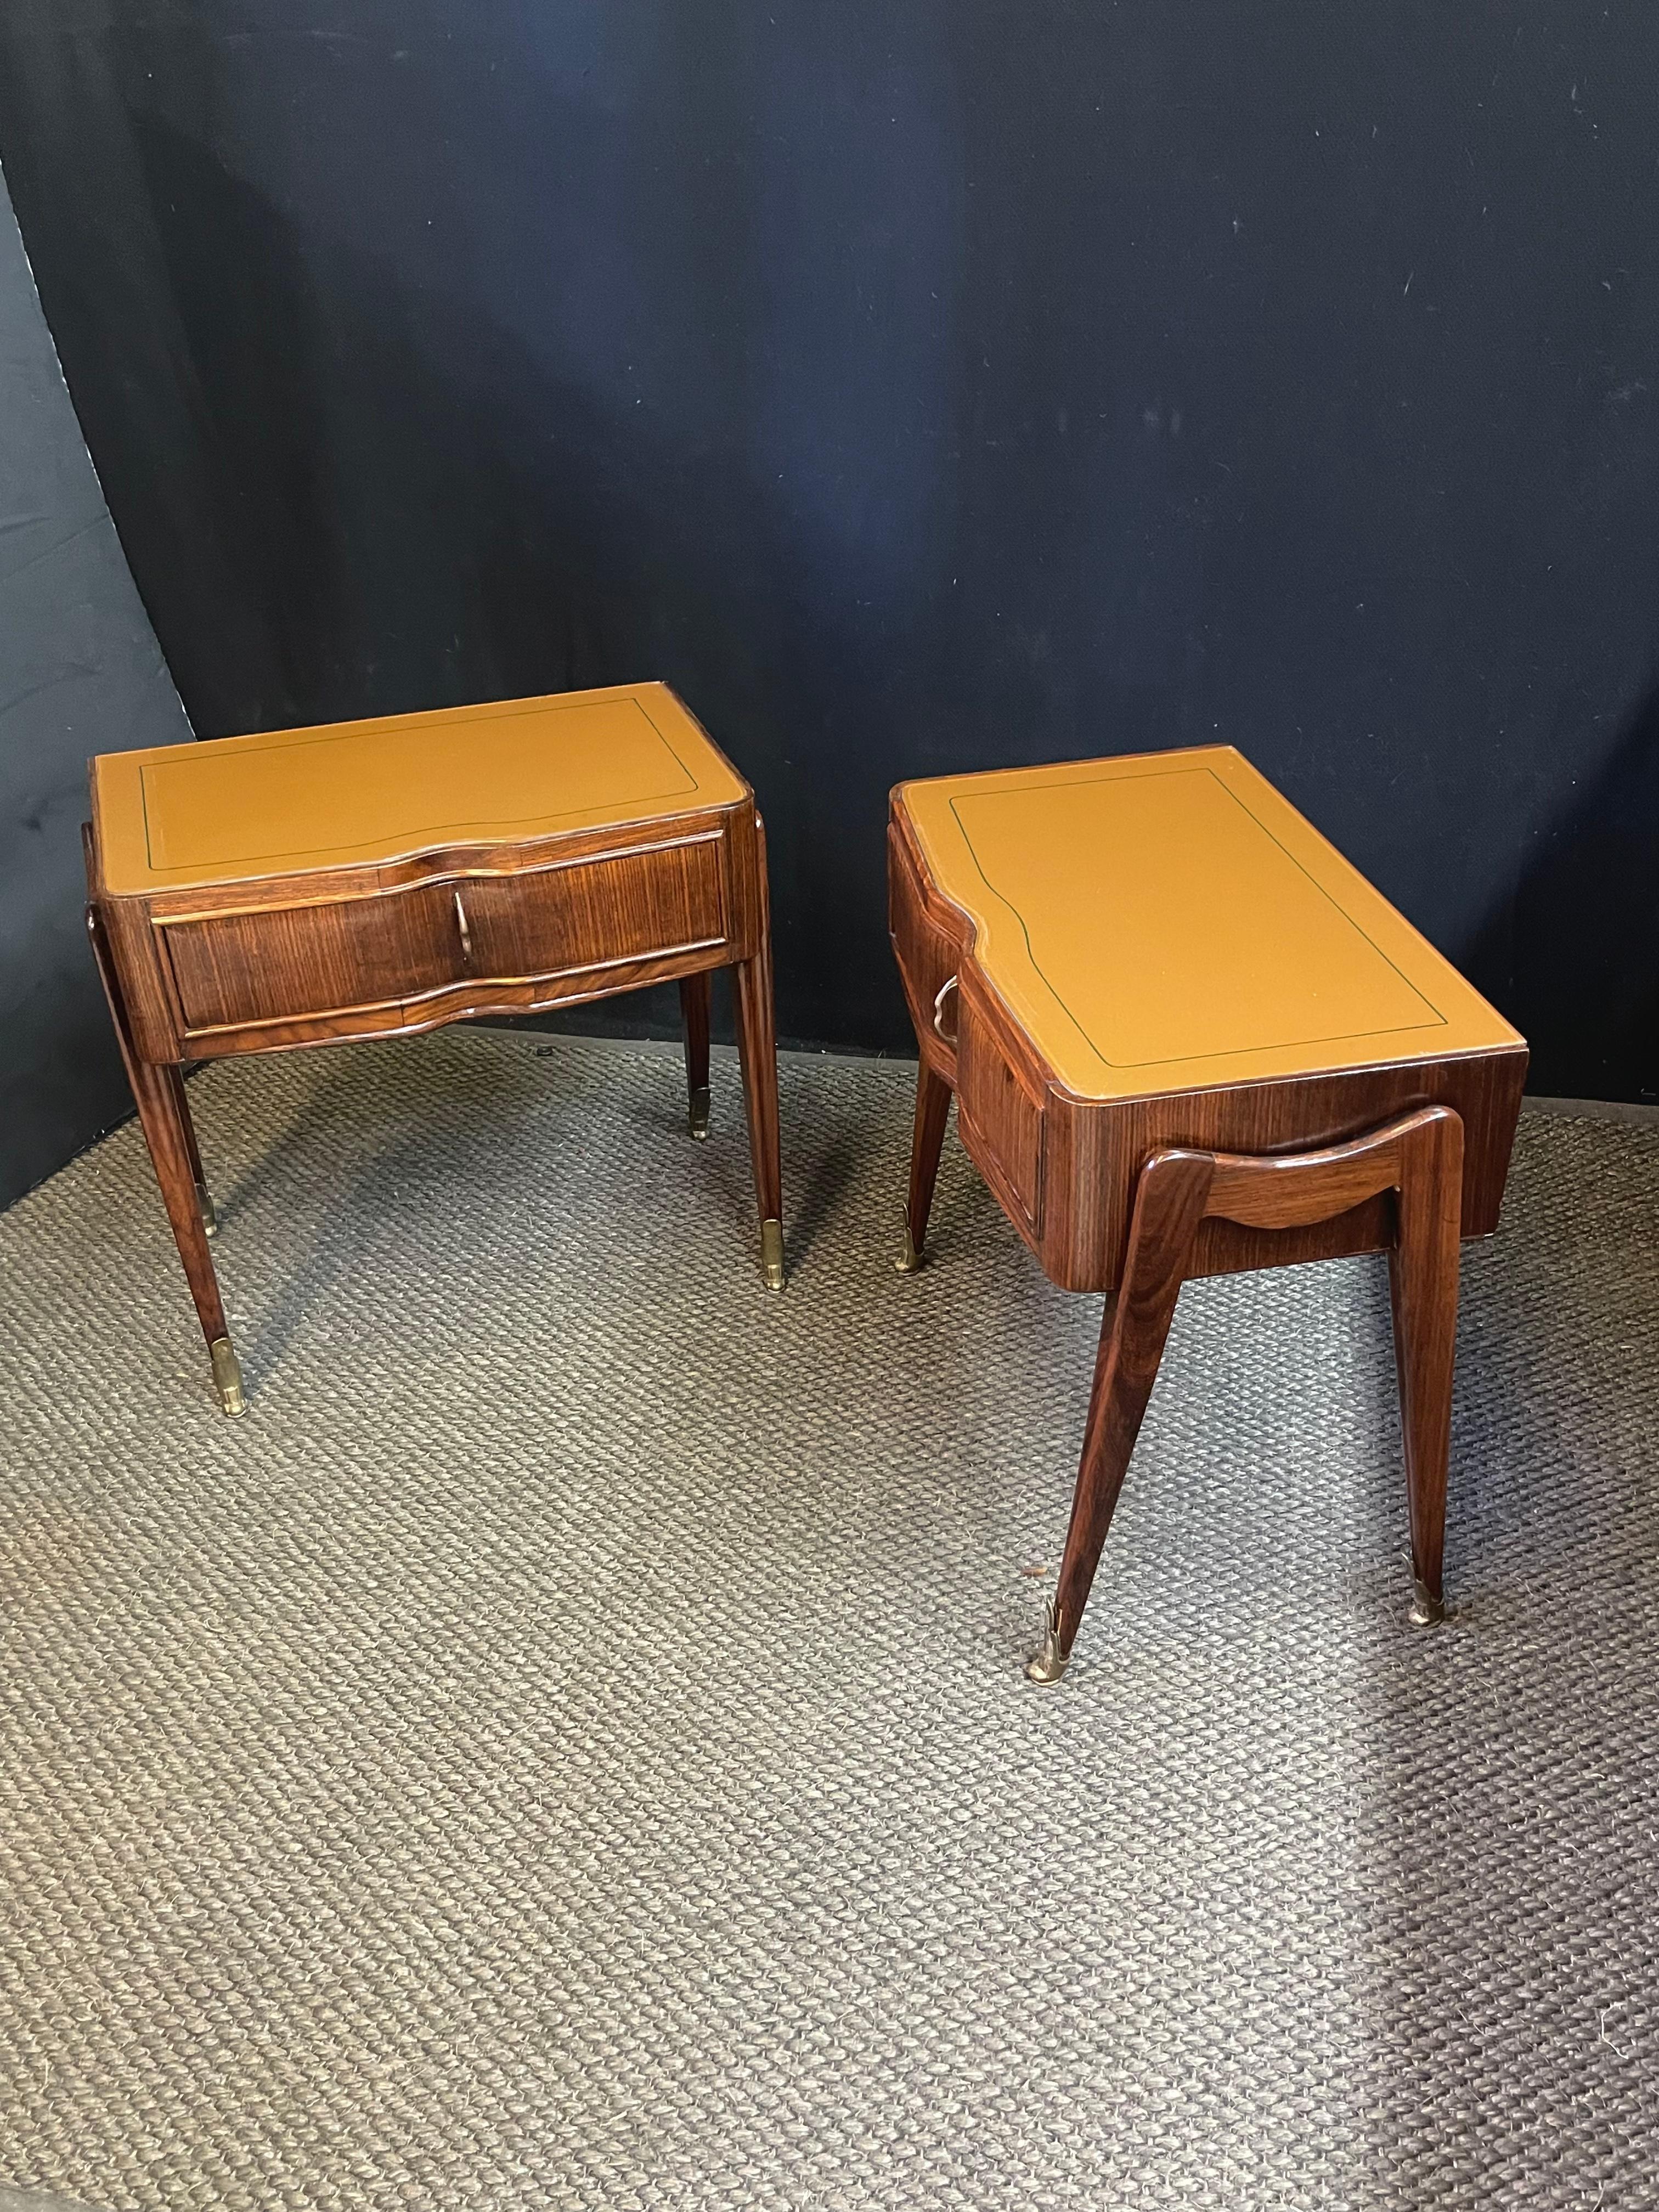 Italian Midcentury Modern Bedside Tables by Vittorio Dassi In Good Condition For Sale In Atlanta, GA